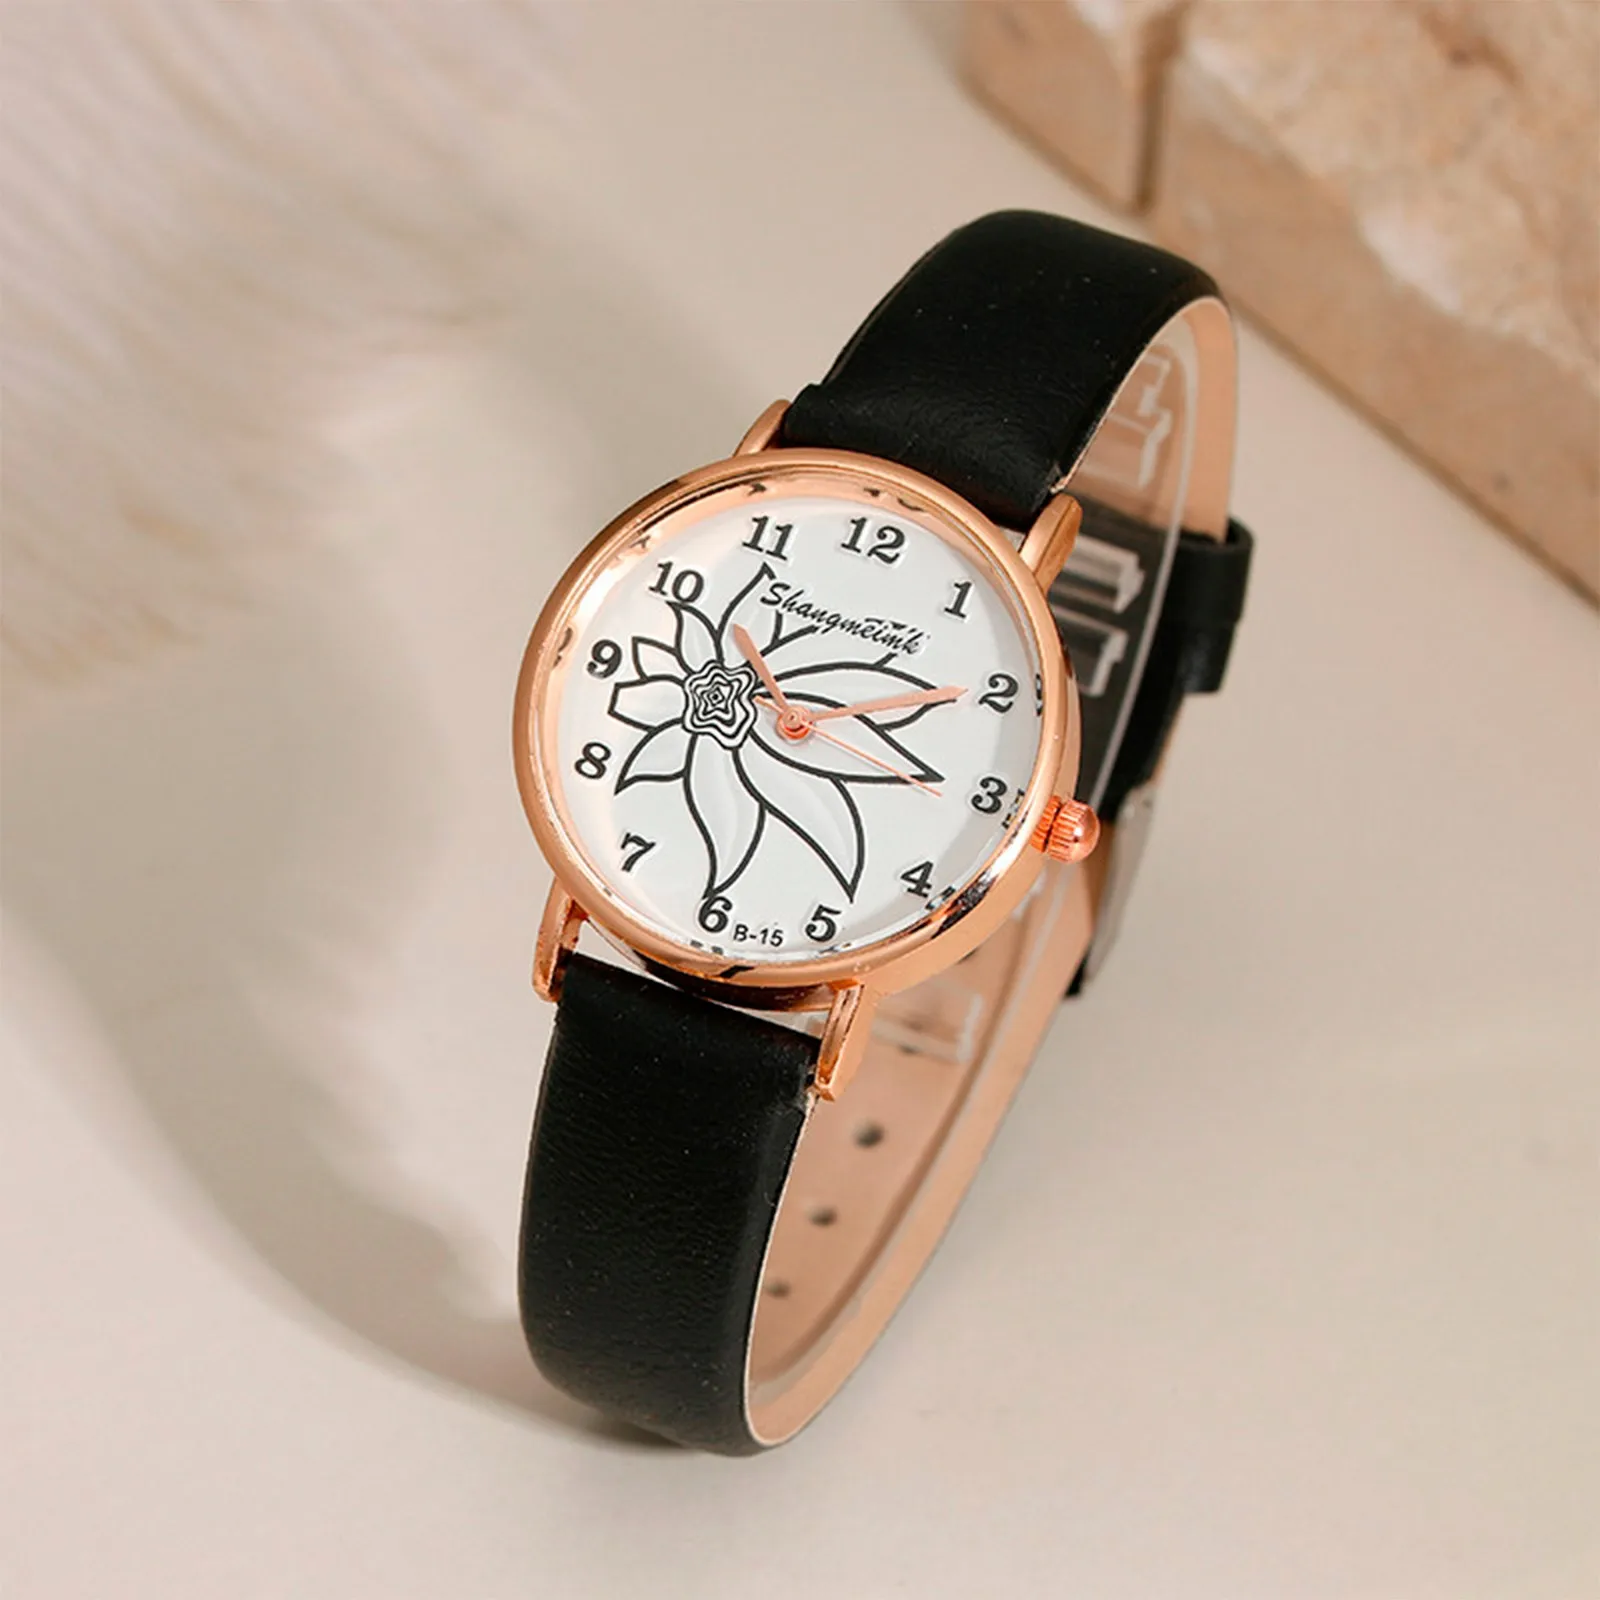 

Women's Watch Digital Dial Quartz Wristwatches Leather Wristband Ladies Watch Gift Suitable For Women And Girls Montres Femmes